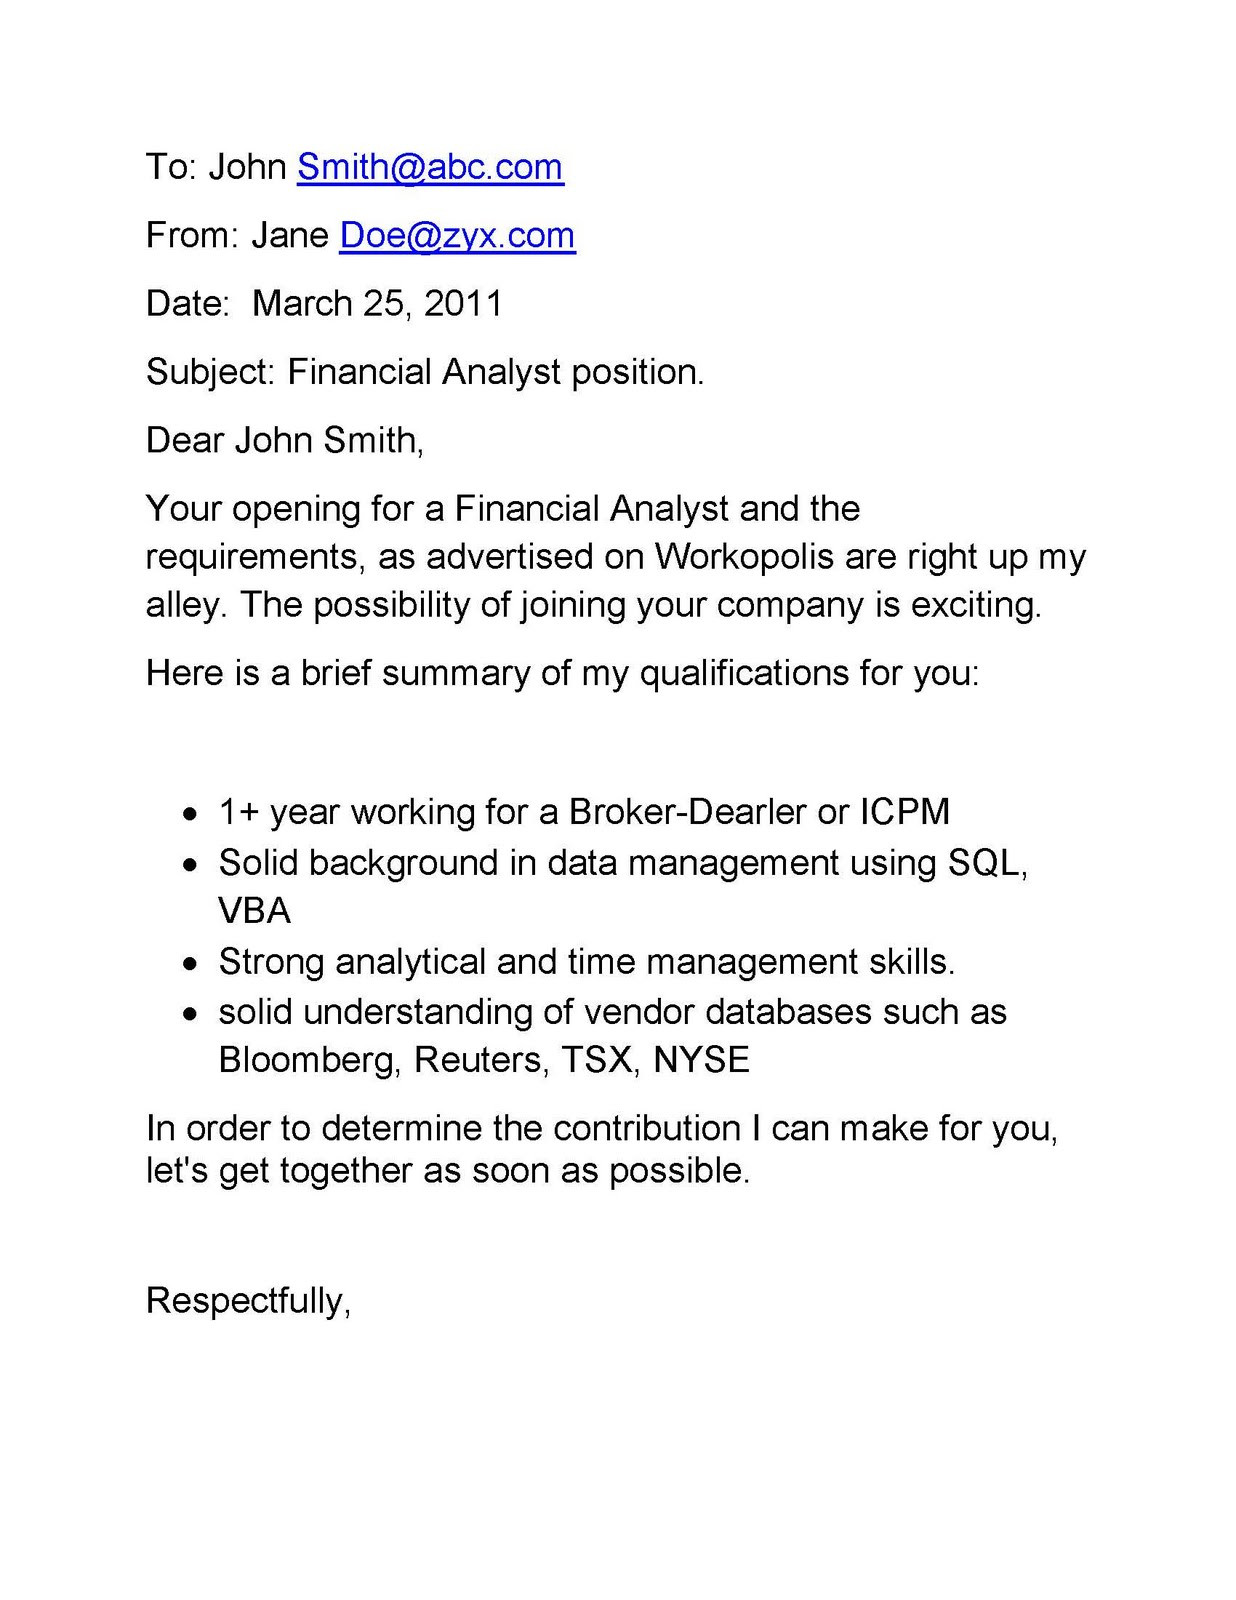 Sample Cover Letter for A Resume by Email Email Cover Letter Samples Email Cover Letter for